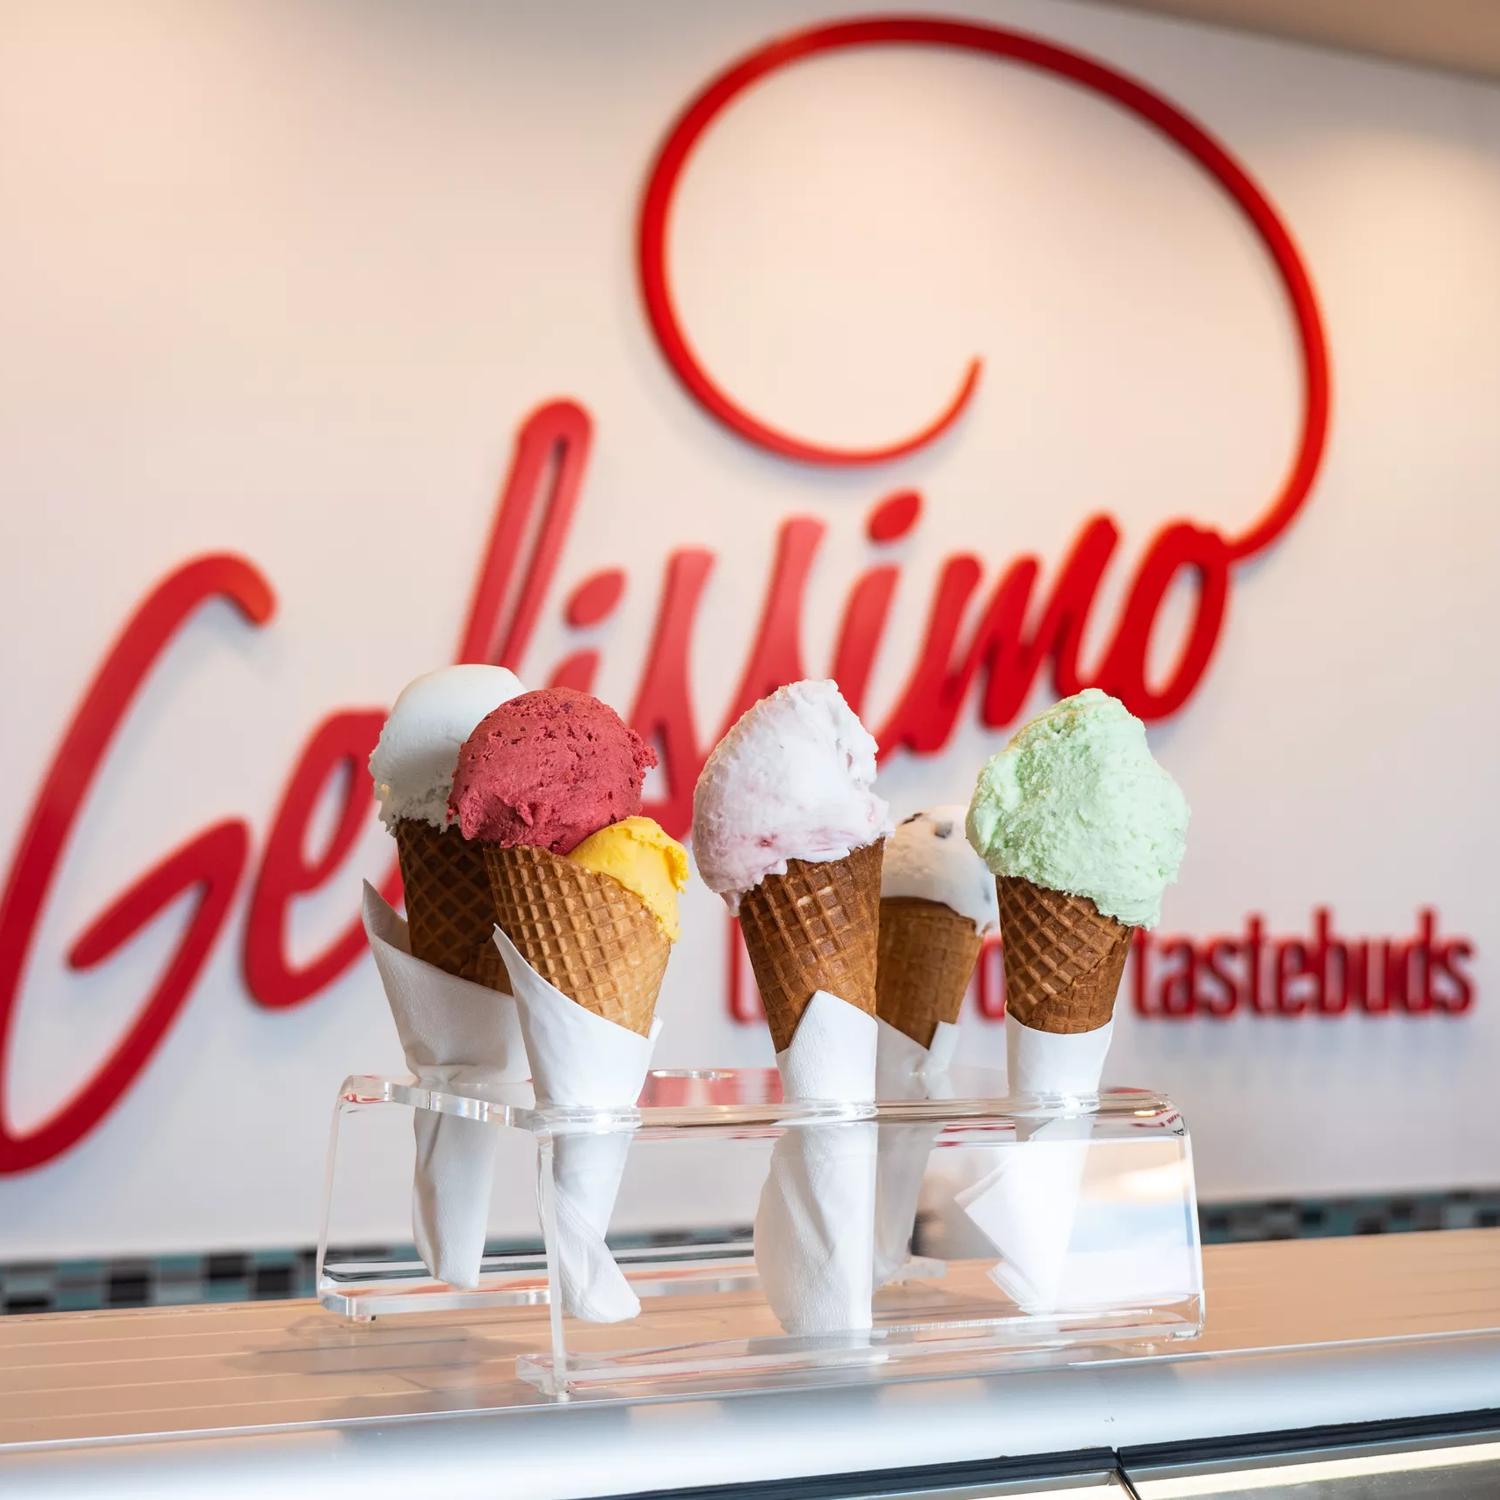 5 different coloured ice creams on a stand in front of the Gelissimo Gelateria sign.